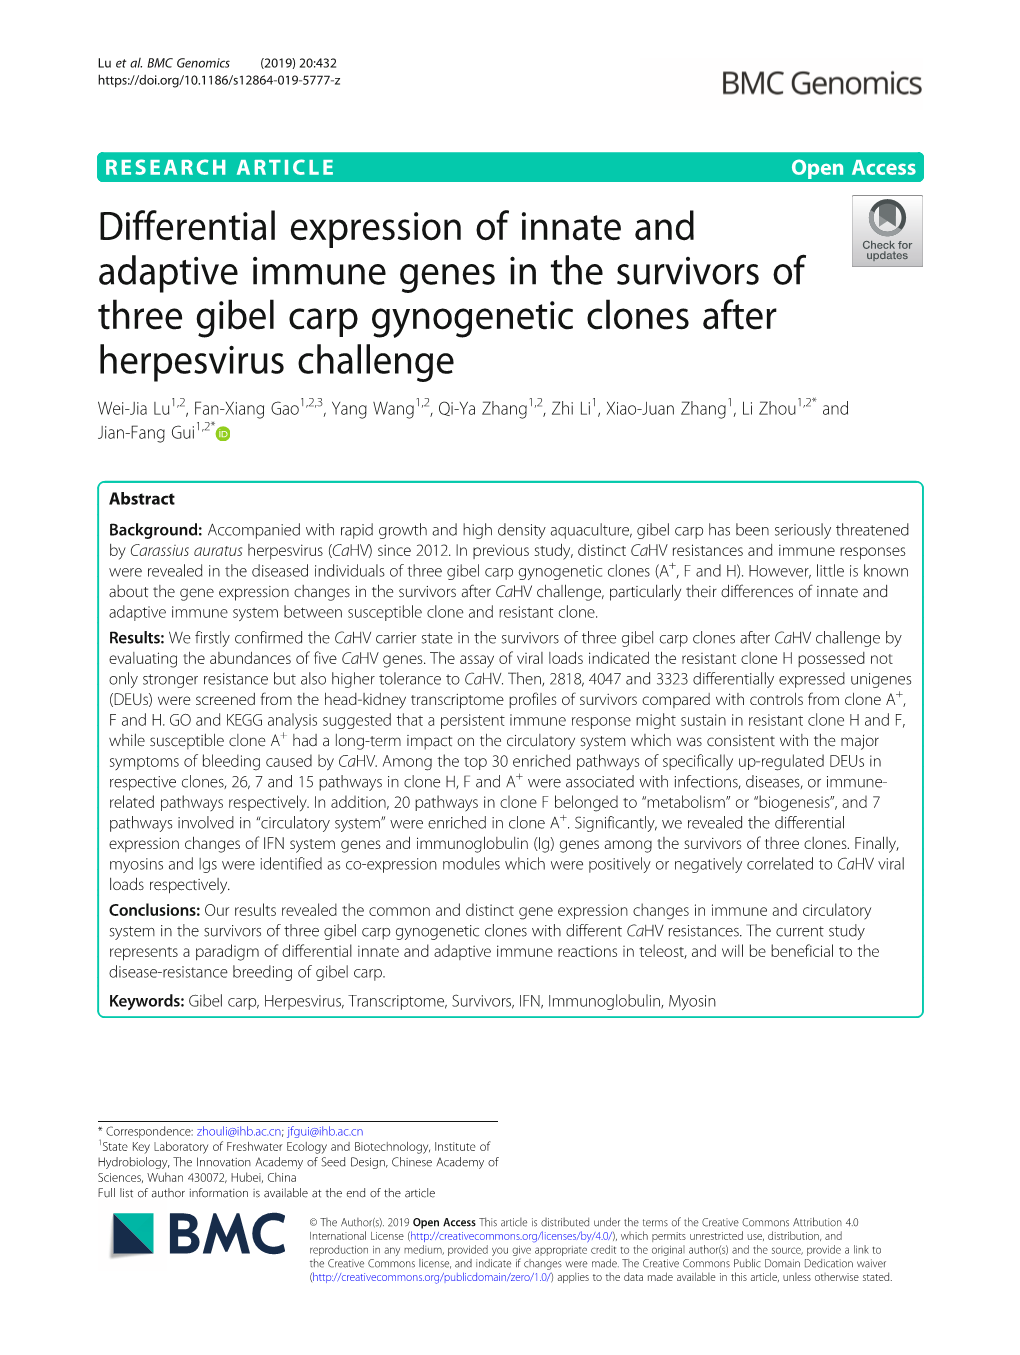 Differential Expression of Innate and Adaptive Immune Genes in the Survivors of Three Gibel Carp Gynogenetic Clones After Herpes